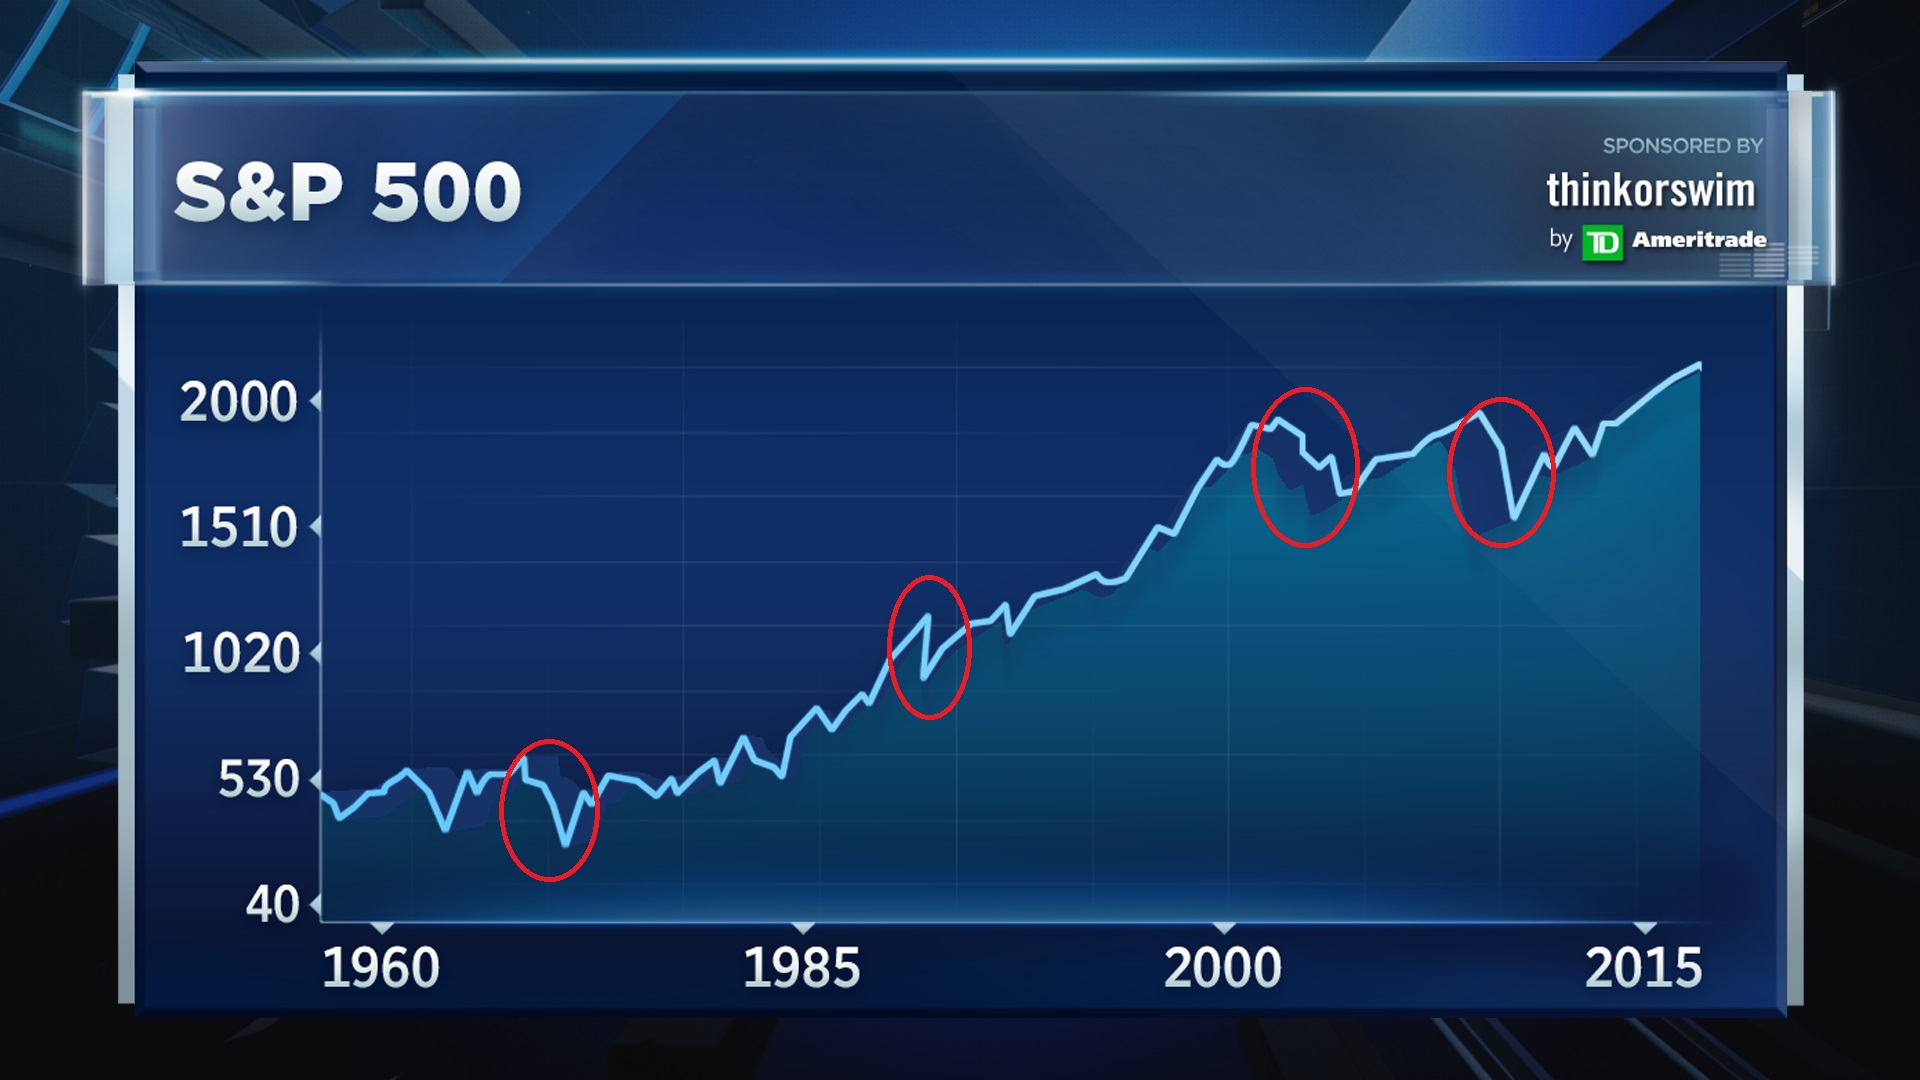 When was the S&P 500 founded?